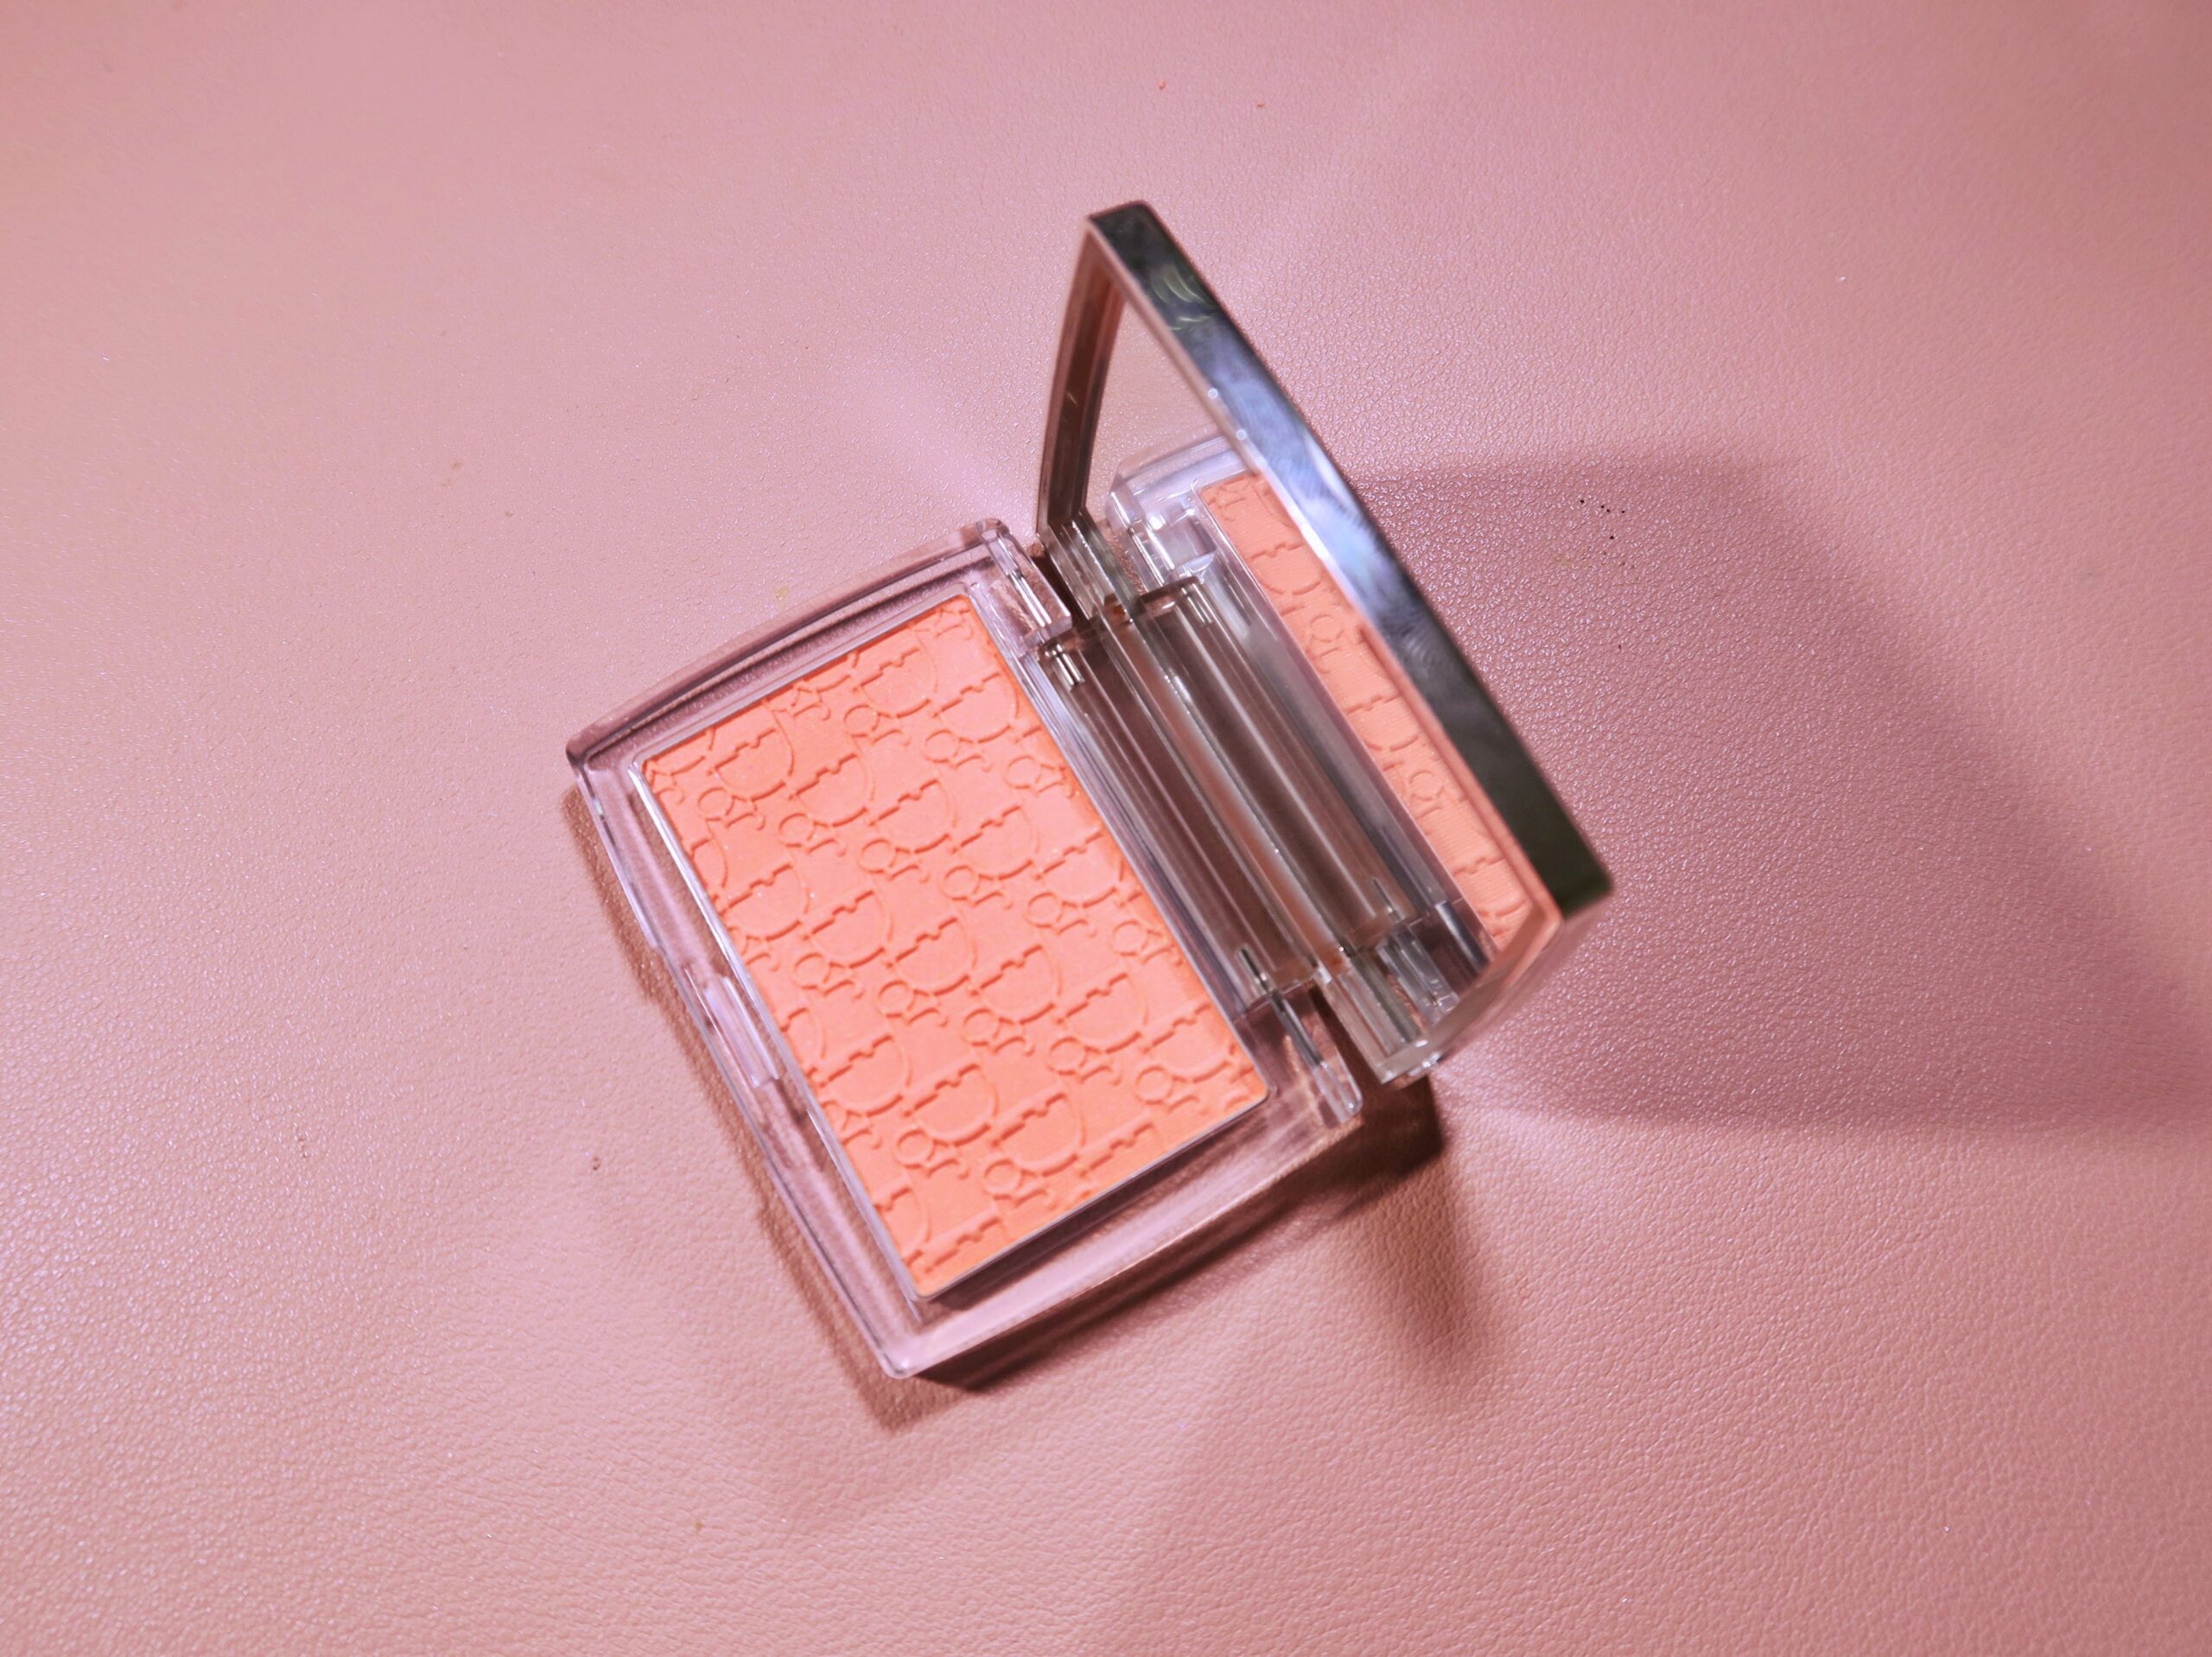 Review: Dior Backstage Rosy Glow in Coral